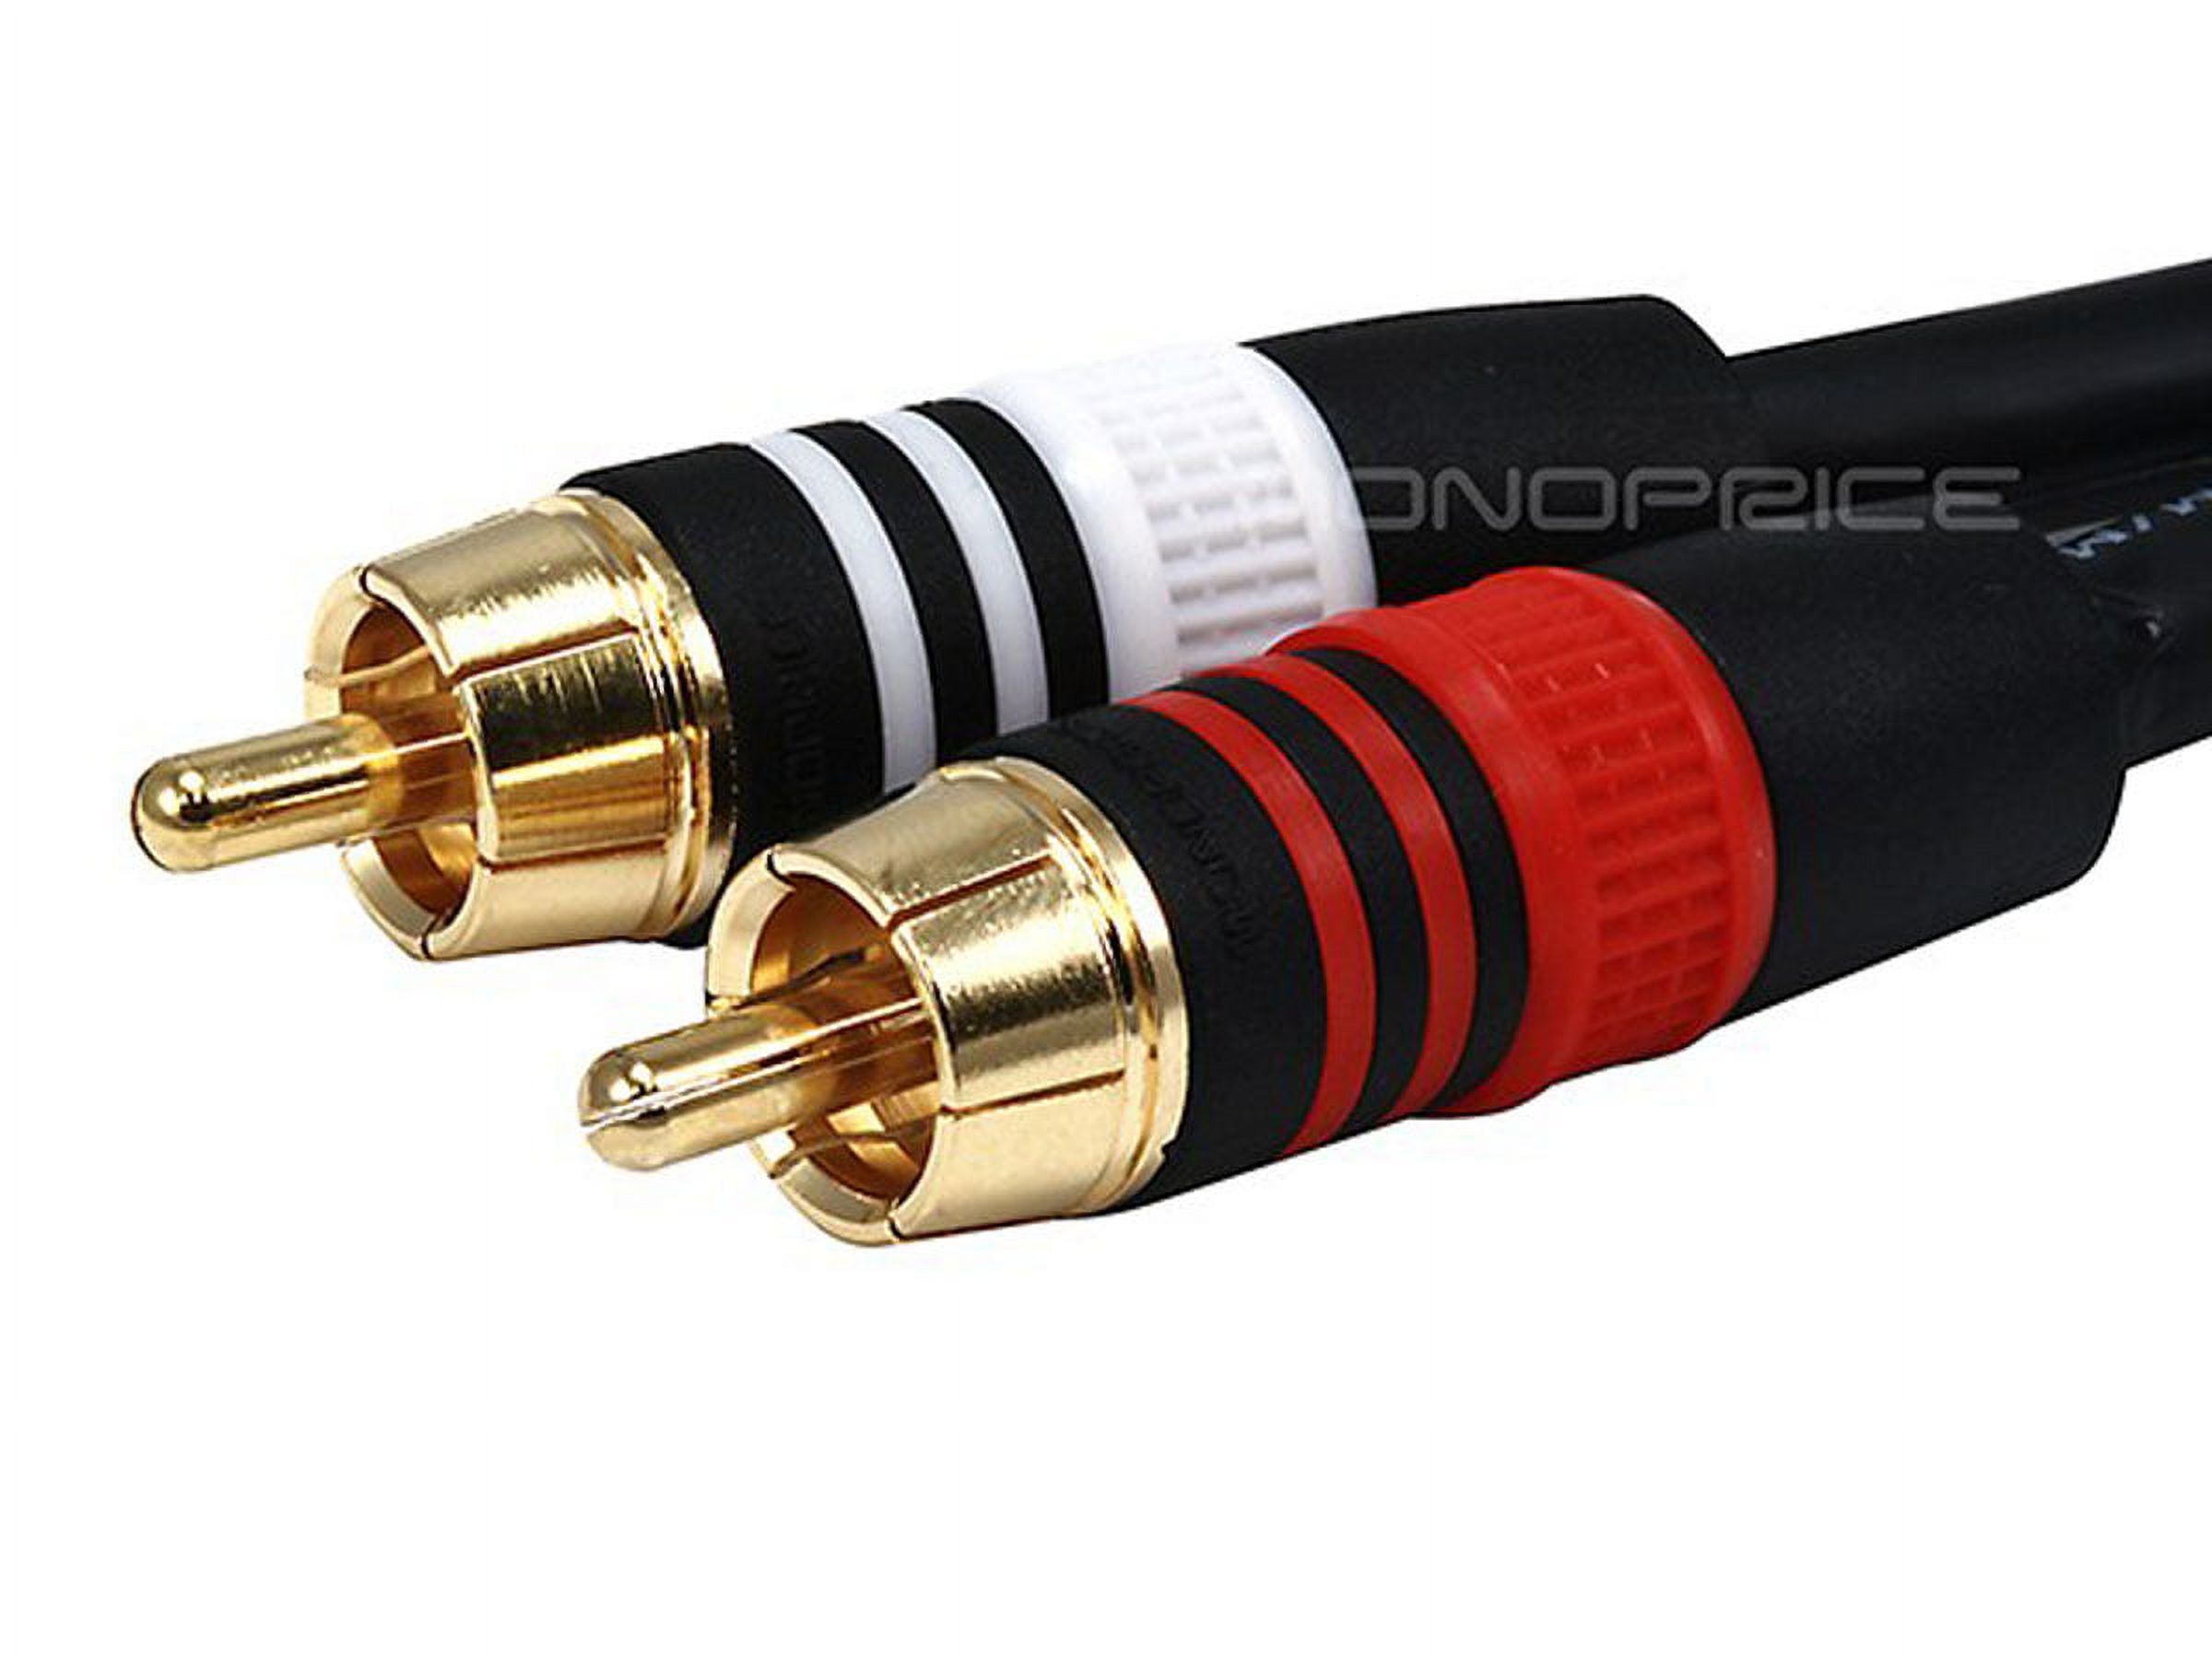 Monoprice Audio Cable - 0.5 Feet - Black | Premium 3.5mm Stereo Female to 2 RCA Male 22AWG, Gold Plated - image 2 of 3